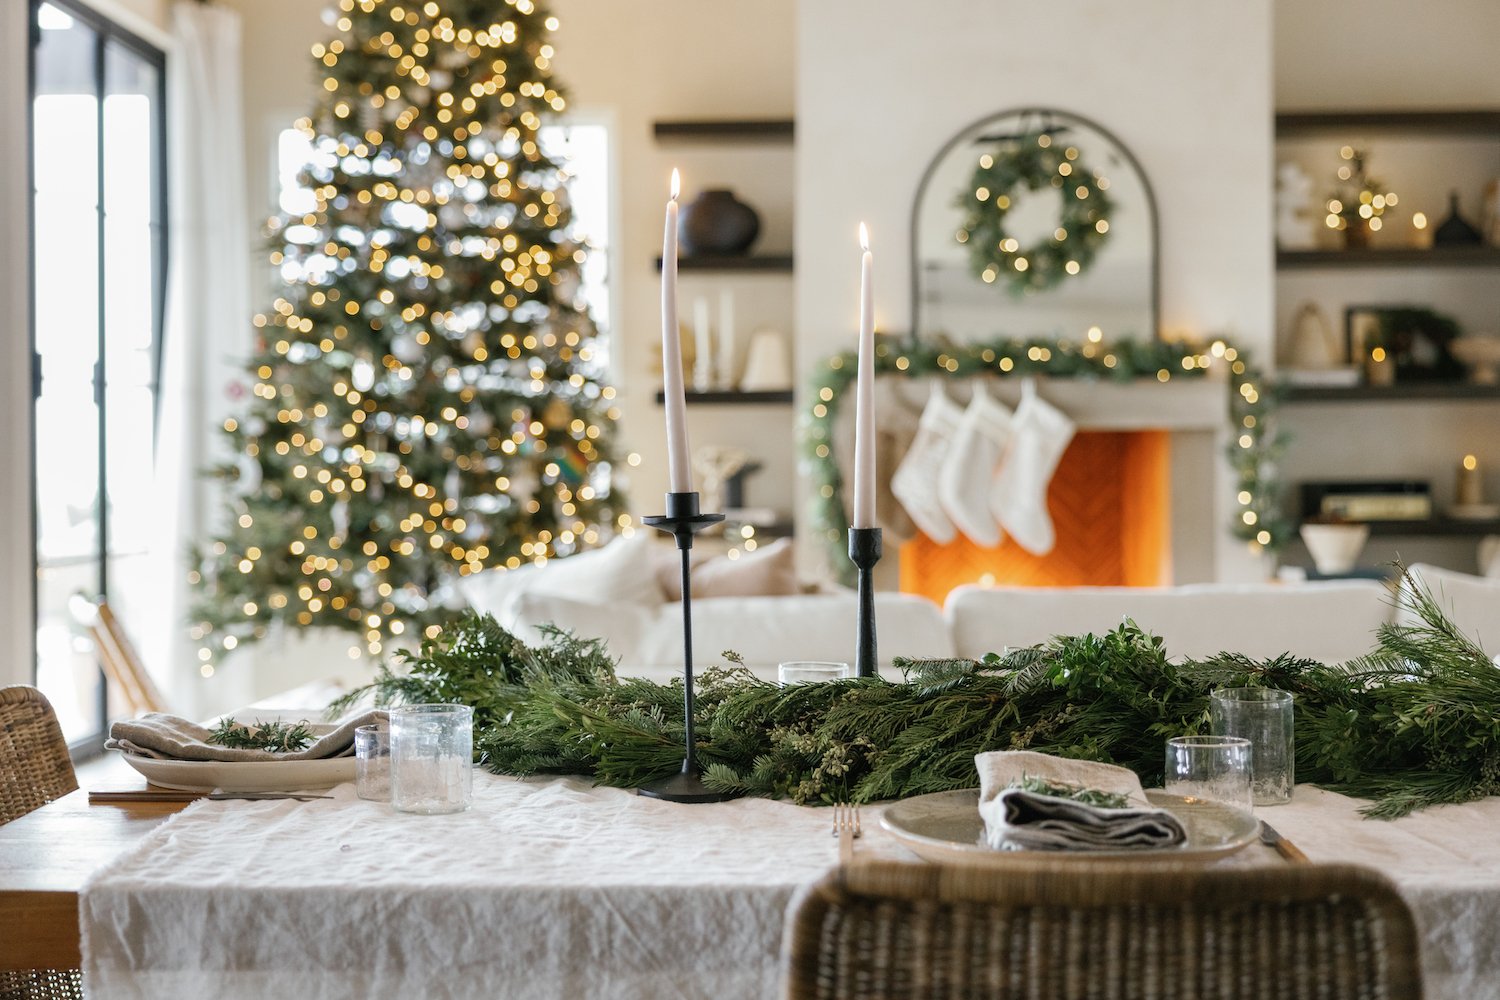 Evergreen Garlands and Twinkling Lights—How I Set the Table for This Year’s Holiday Dinner Party